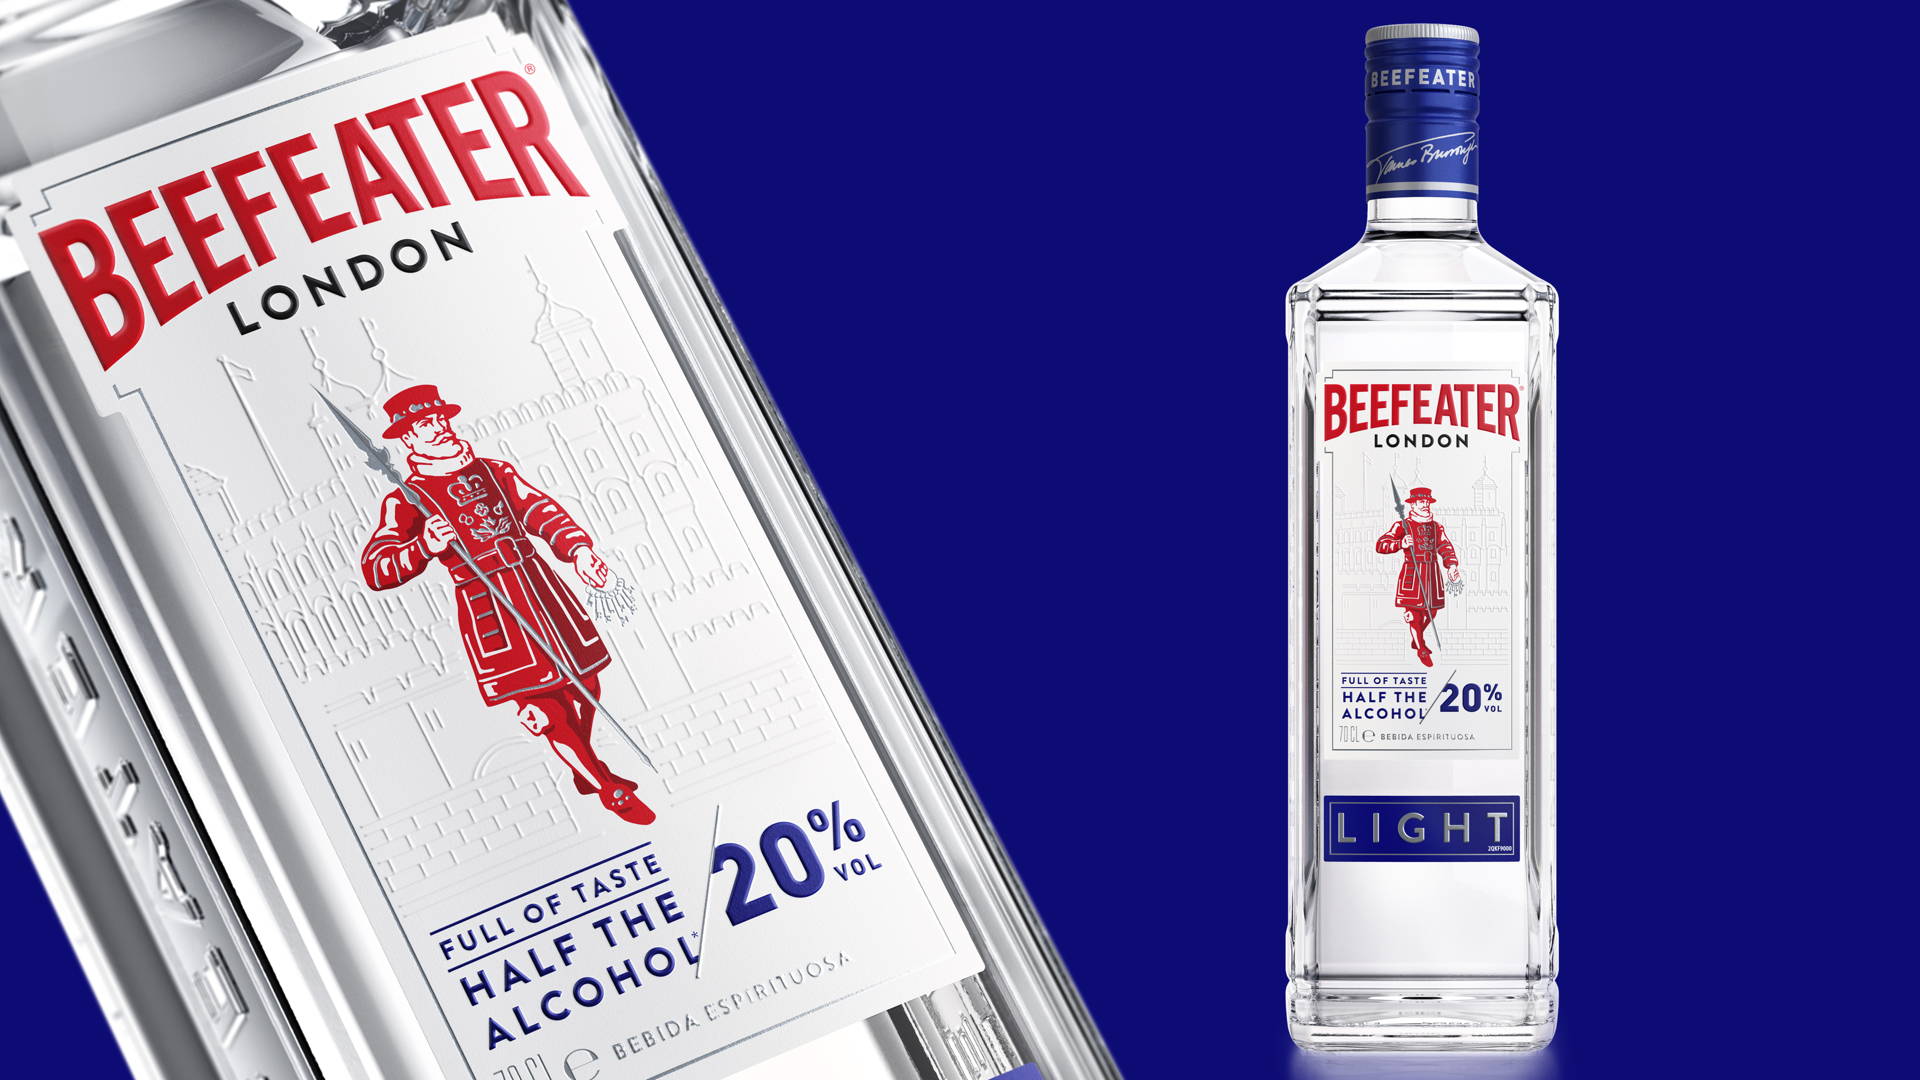 Introducing Beefeater's Take On Light Gin. Dieline, Branding & Packaging Inspiration